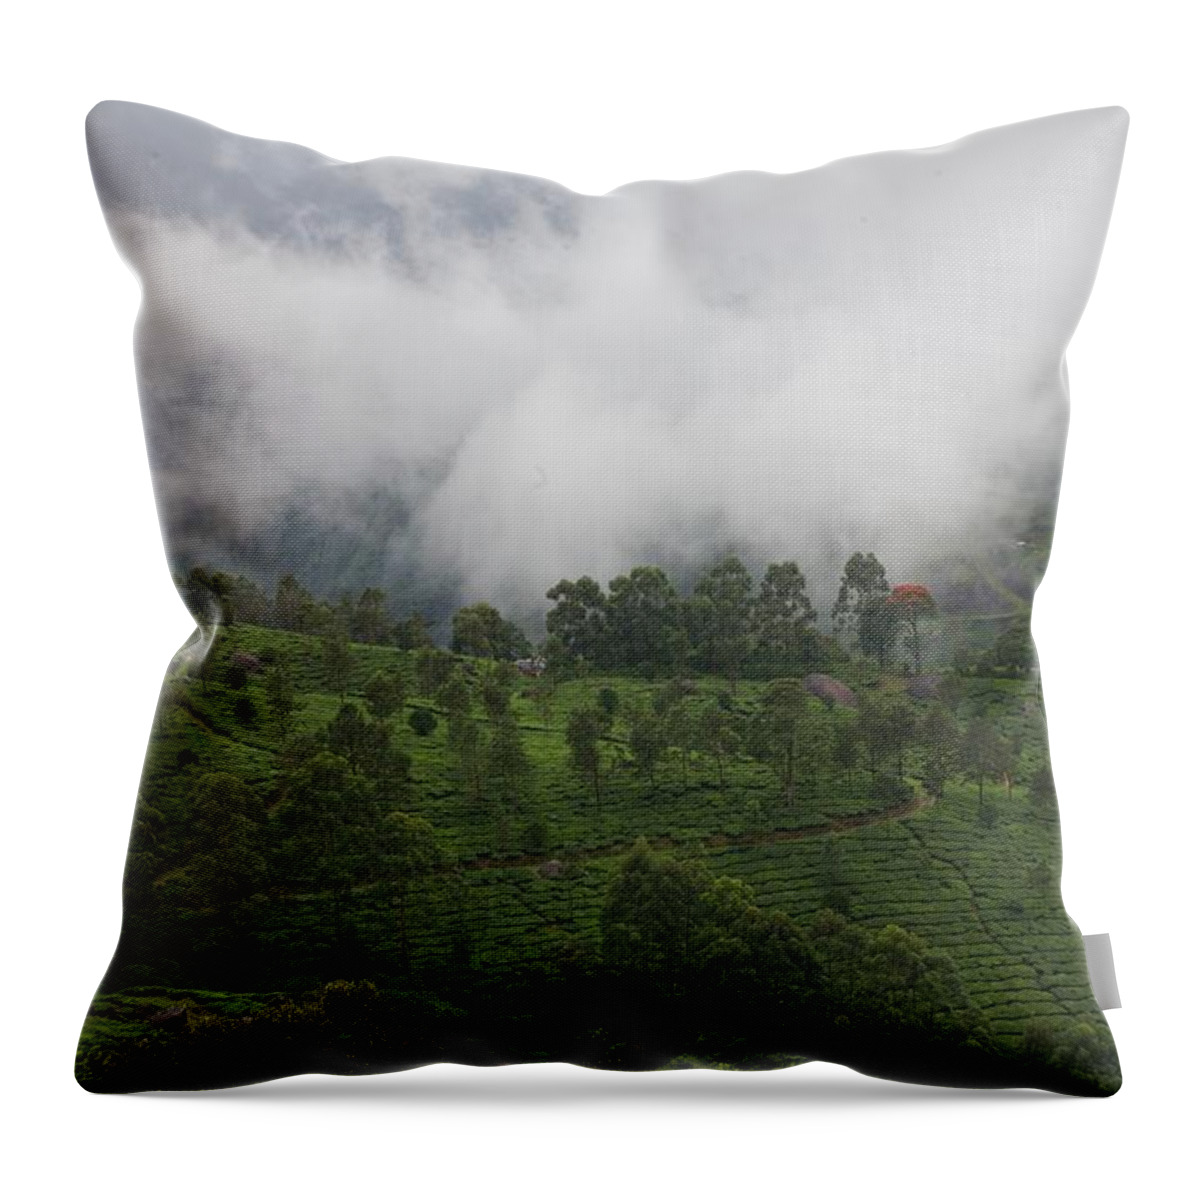 Fog Throw Pillow featuring the photograph Touch Of Red by Lee Stickels